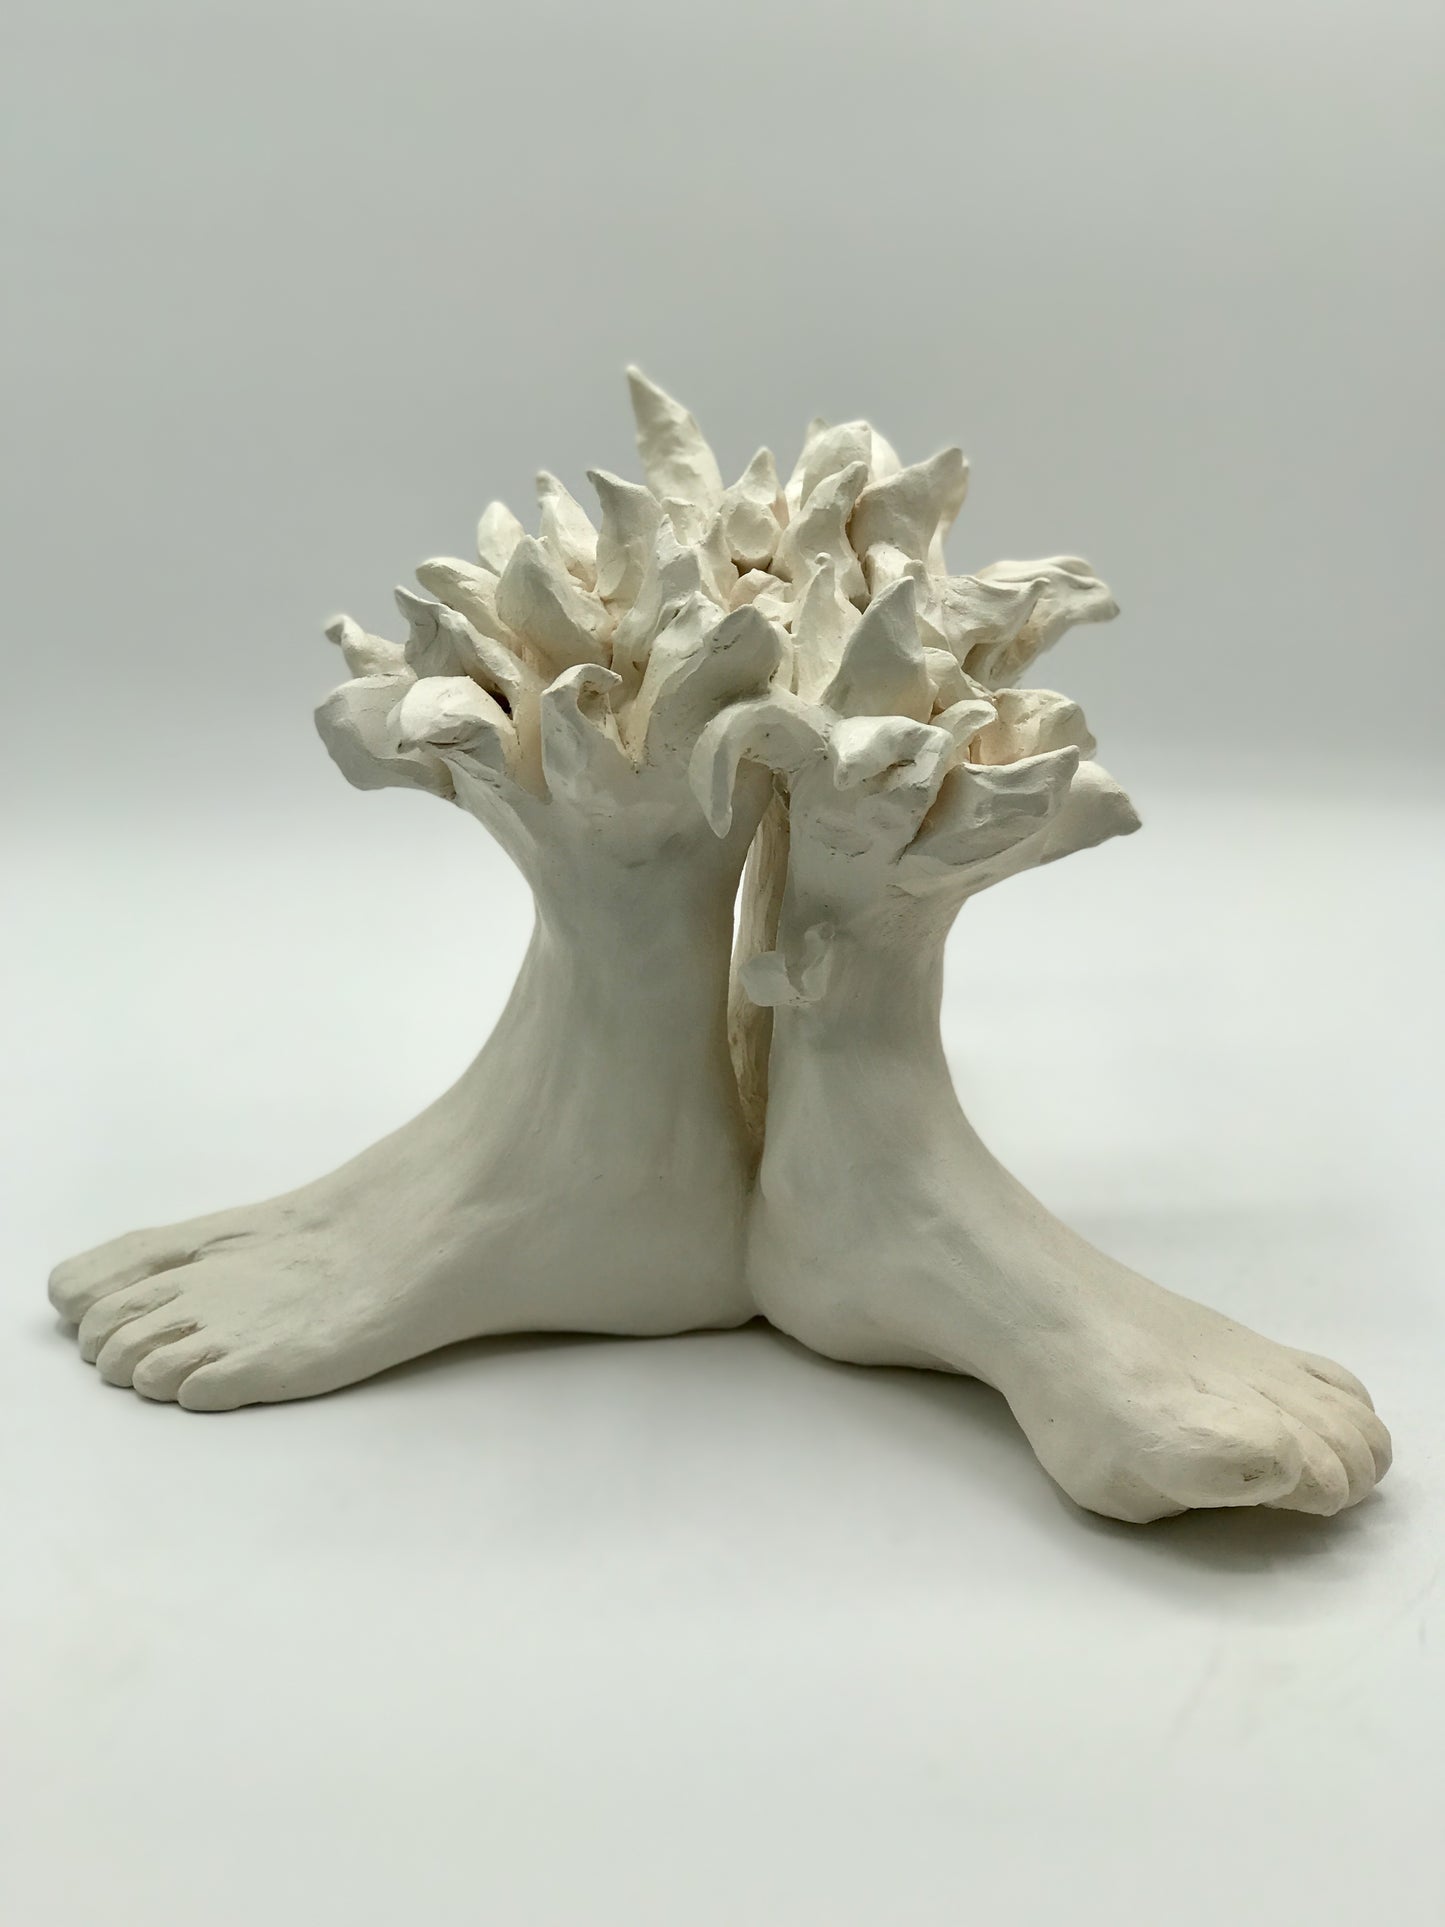 A Forest, Walking - Surreal Clay Sculpture of Feet / Tree